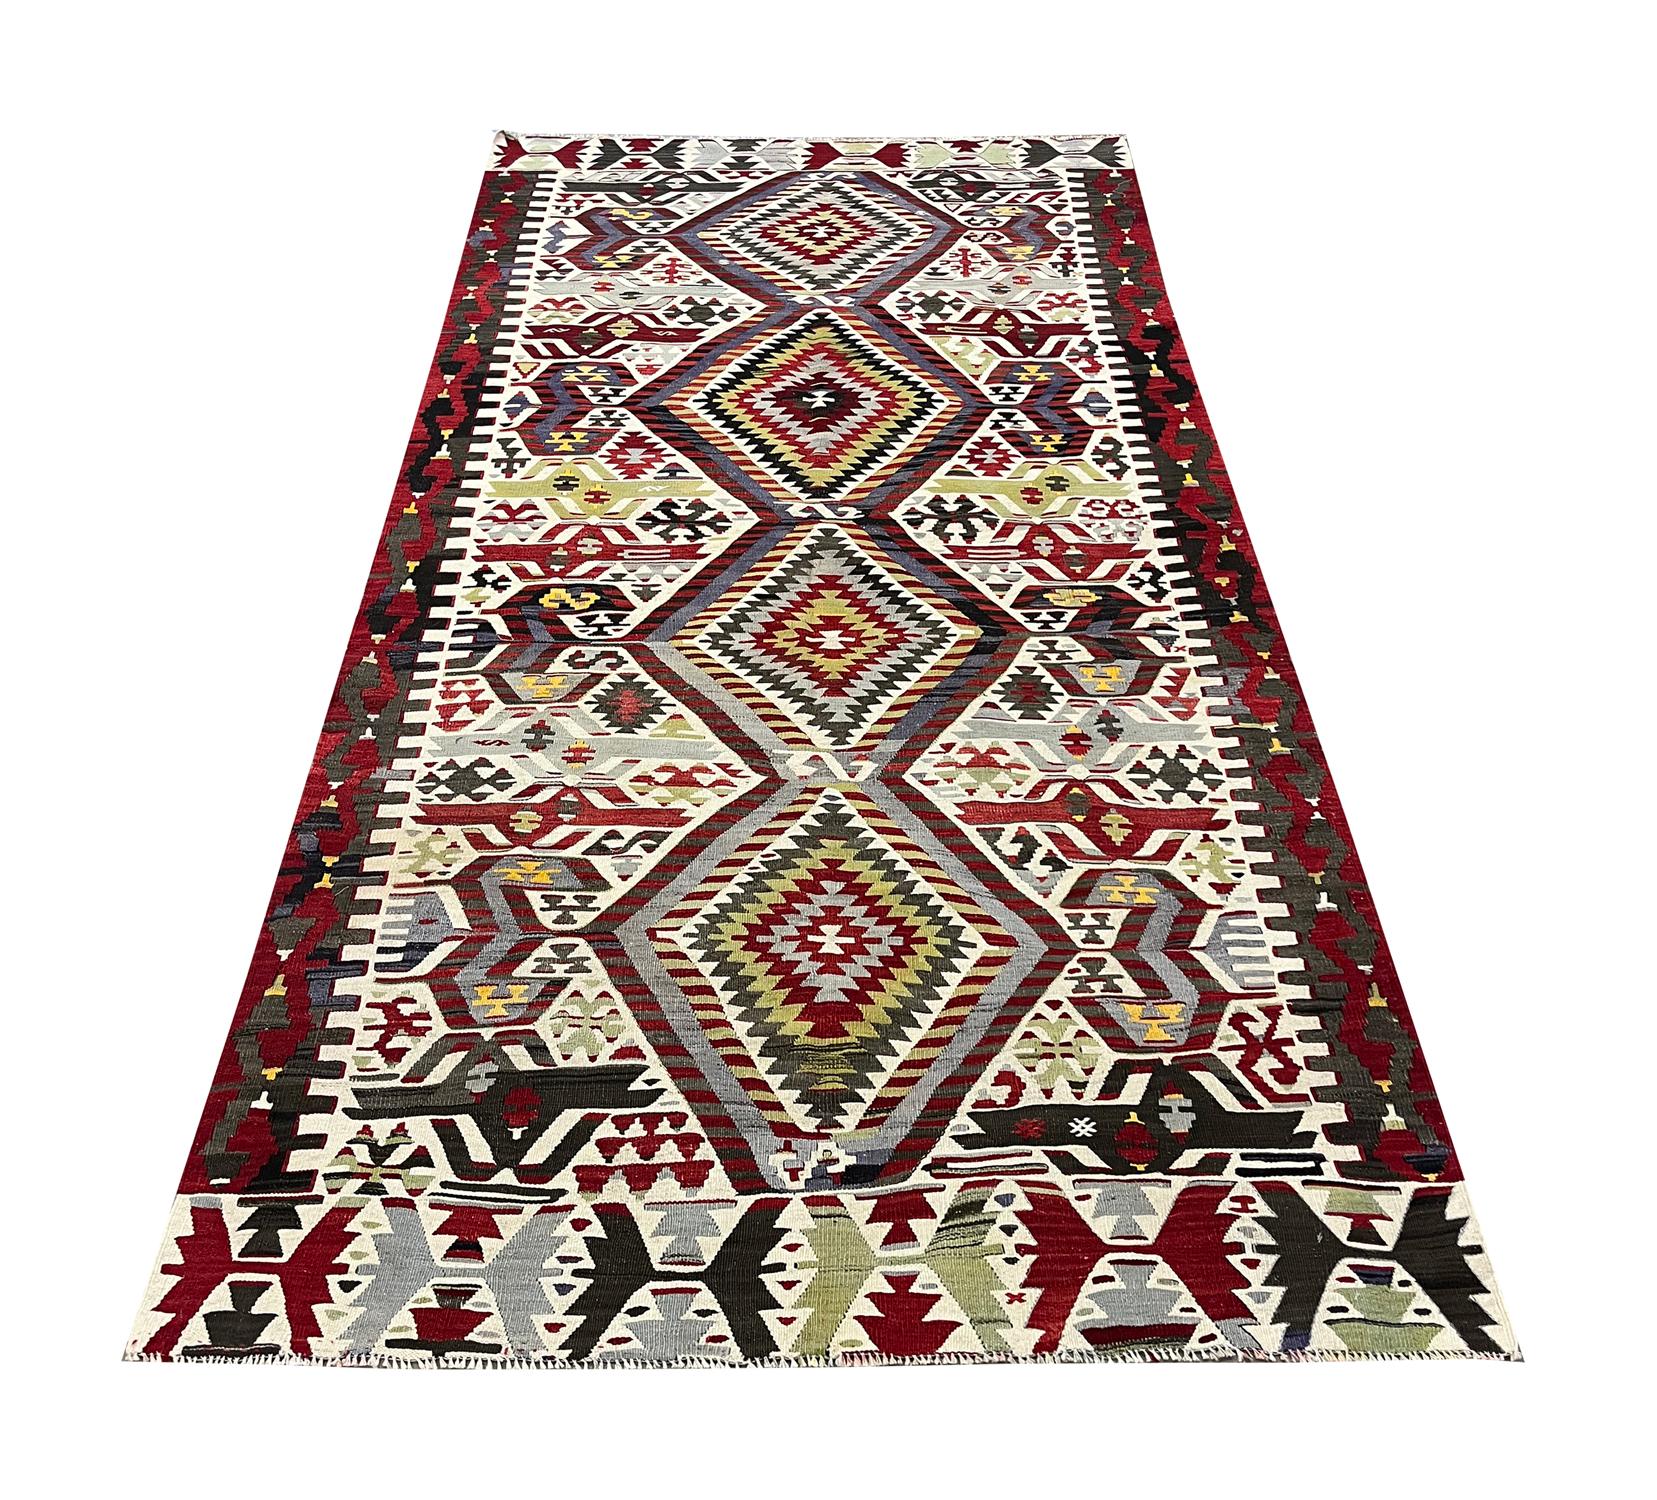 This antique geometric rug is an excellent example of rugs constructed in Turkey In the 1940s. The design features a traditional geometric pattern with four large daimond medallions and a bold enclosing motif background and border. It features